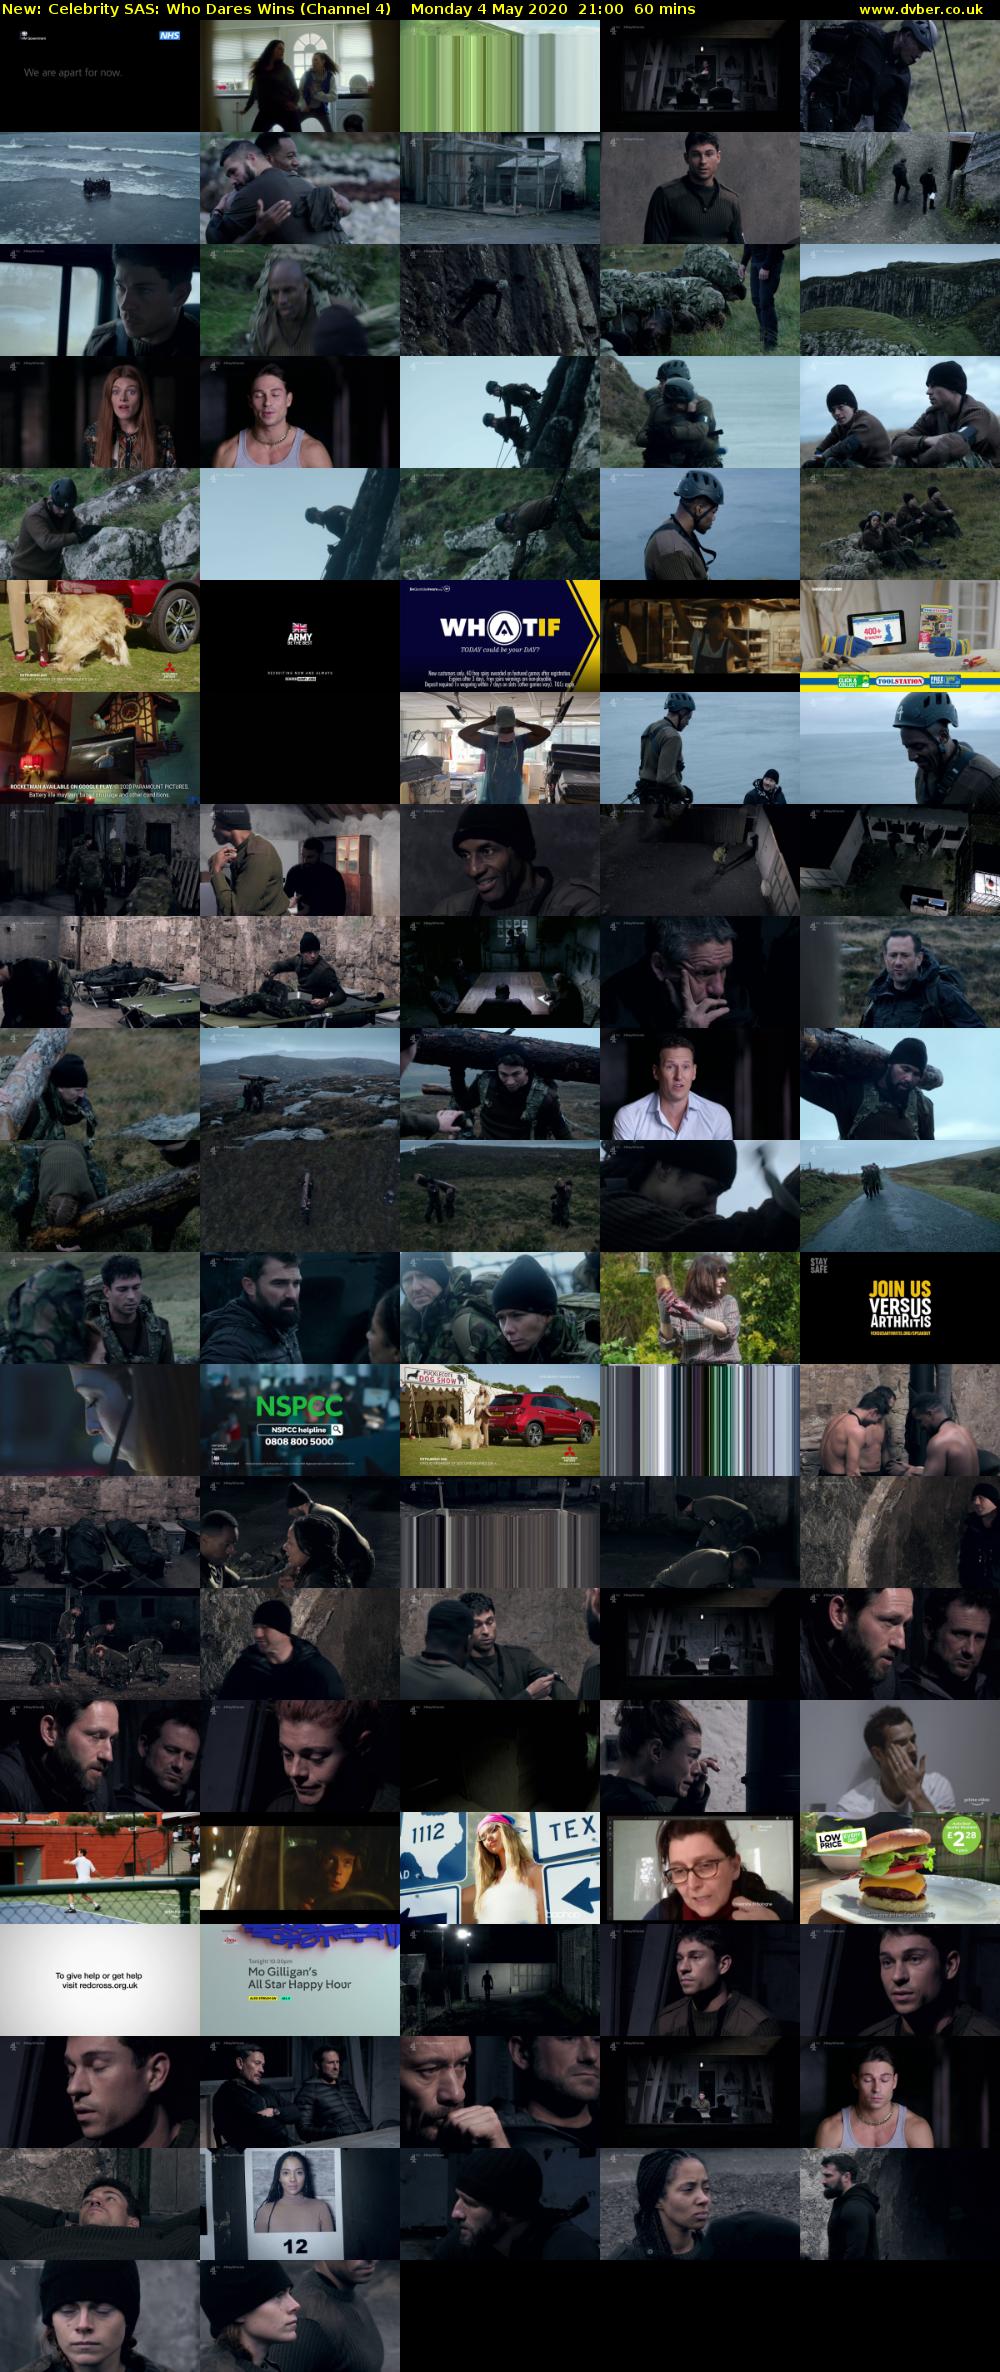 Celebrity SAS: Who Dares Wins (Channel 4) Monday 4 May 2020 21:00 - 22:00